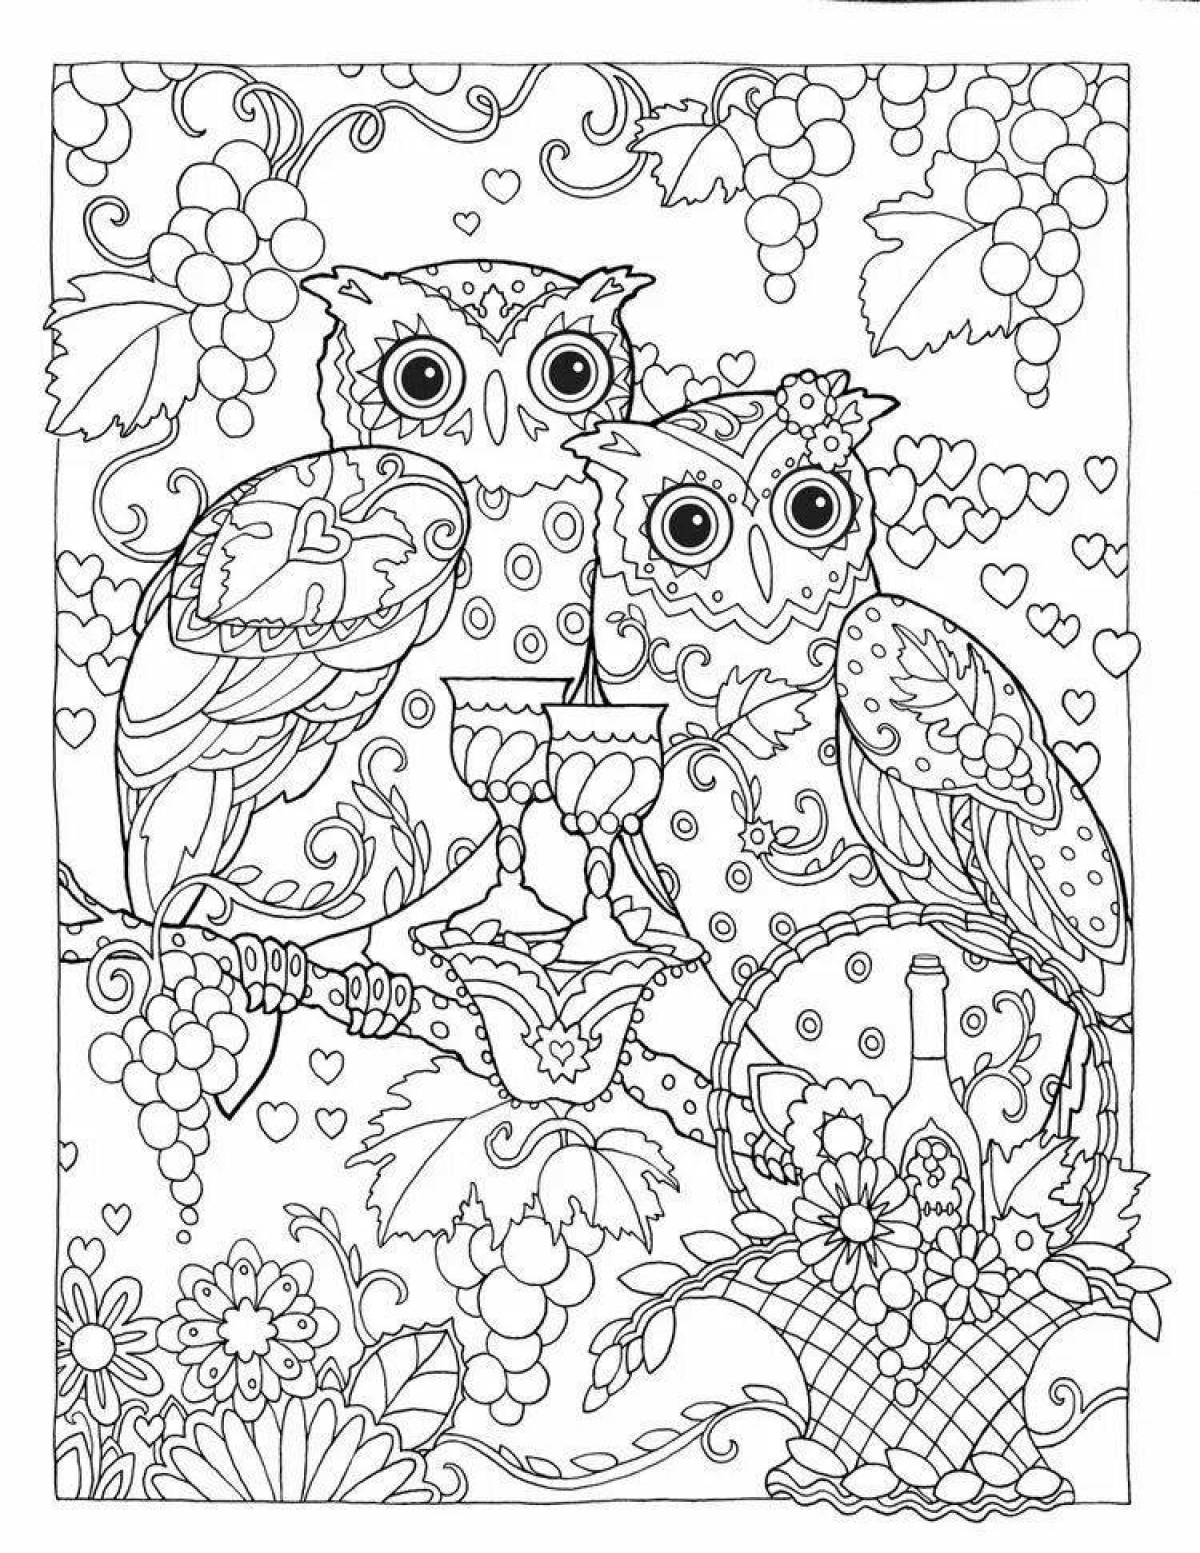 Artful coloring by numbers for adults